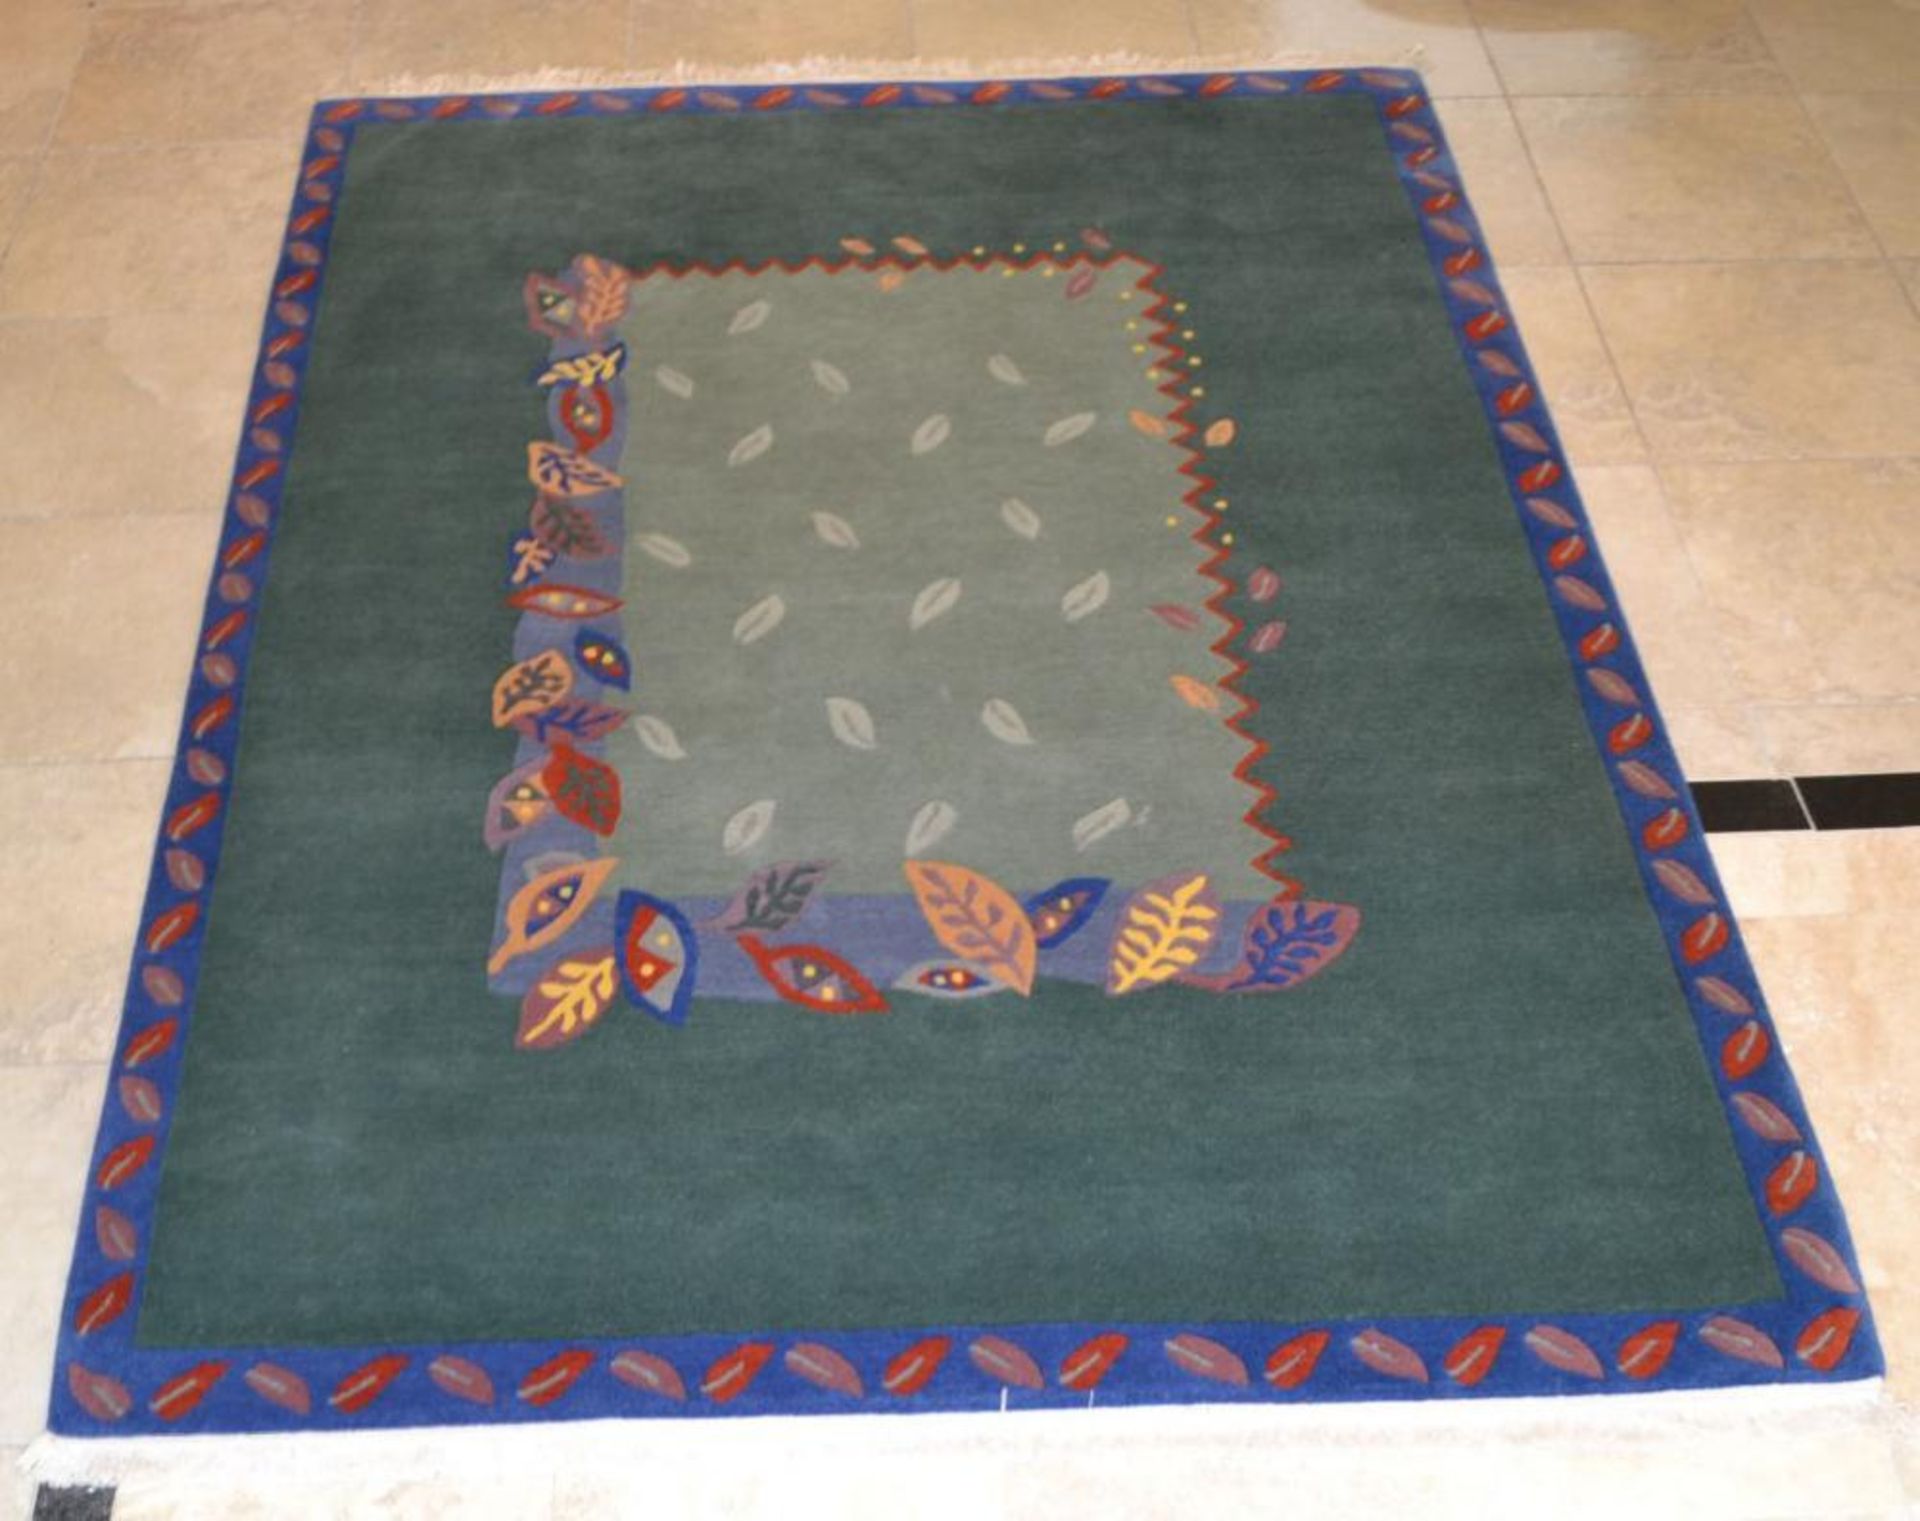 1 x Nepalese Handknotted 100% Wool Rug - Dimensions: 247x174cm - Unused - NO VAT ON THE HAMMER - Re